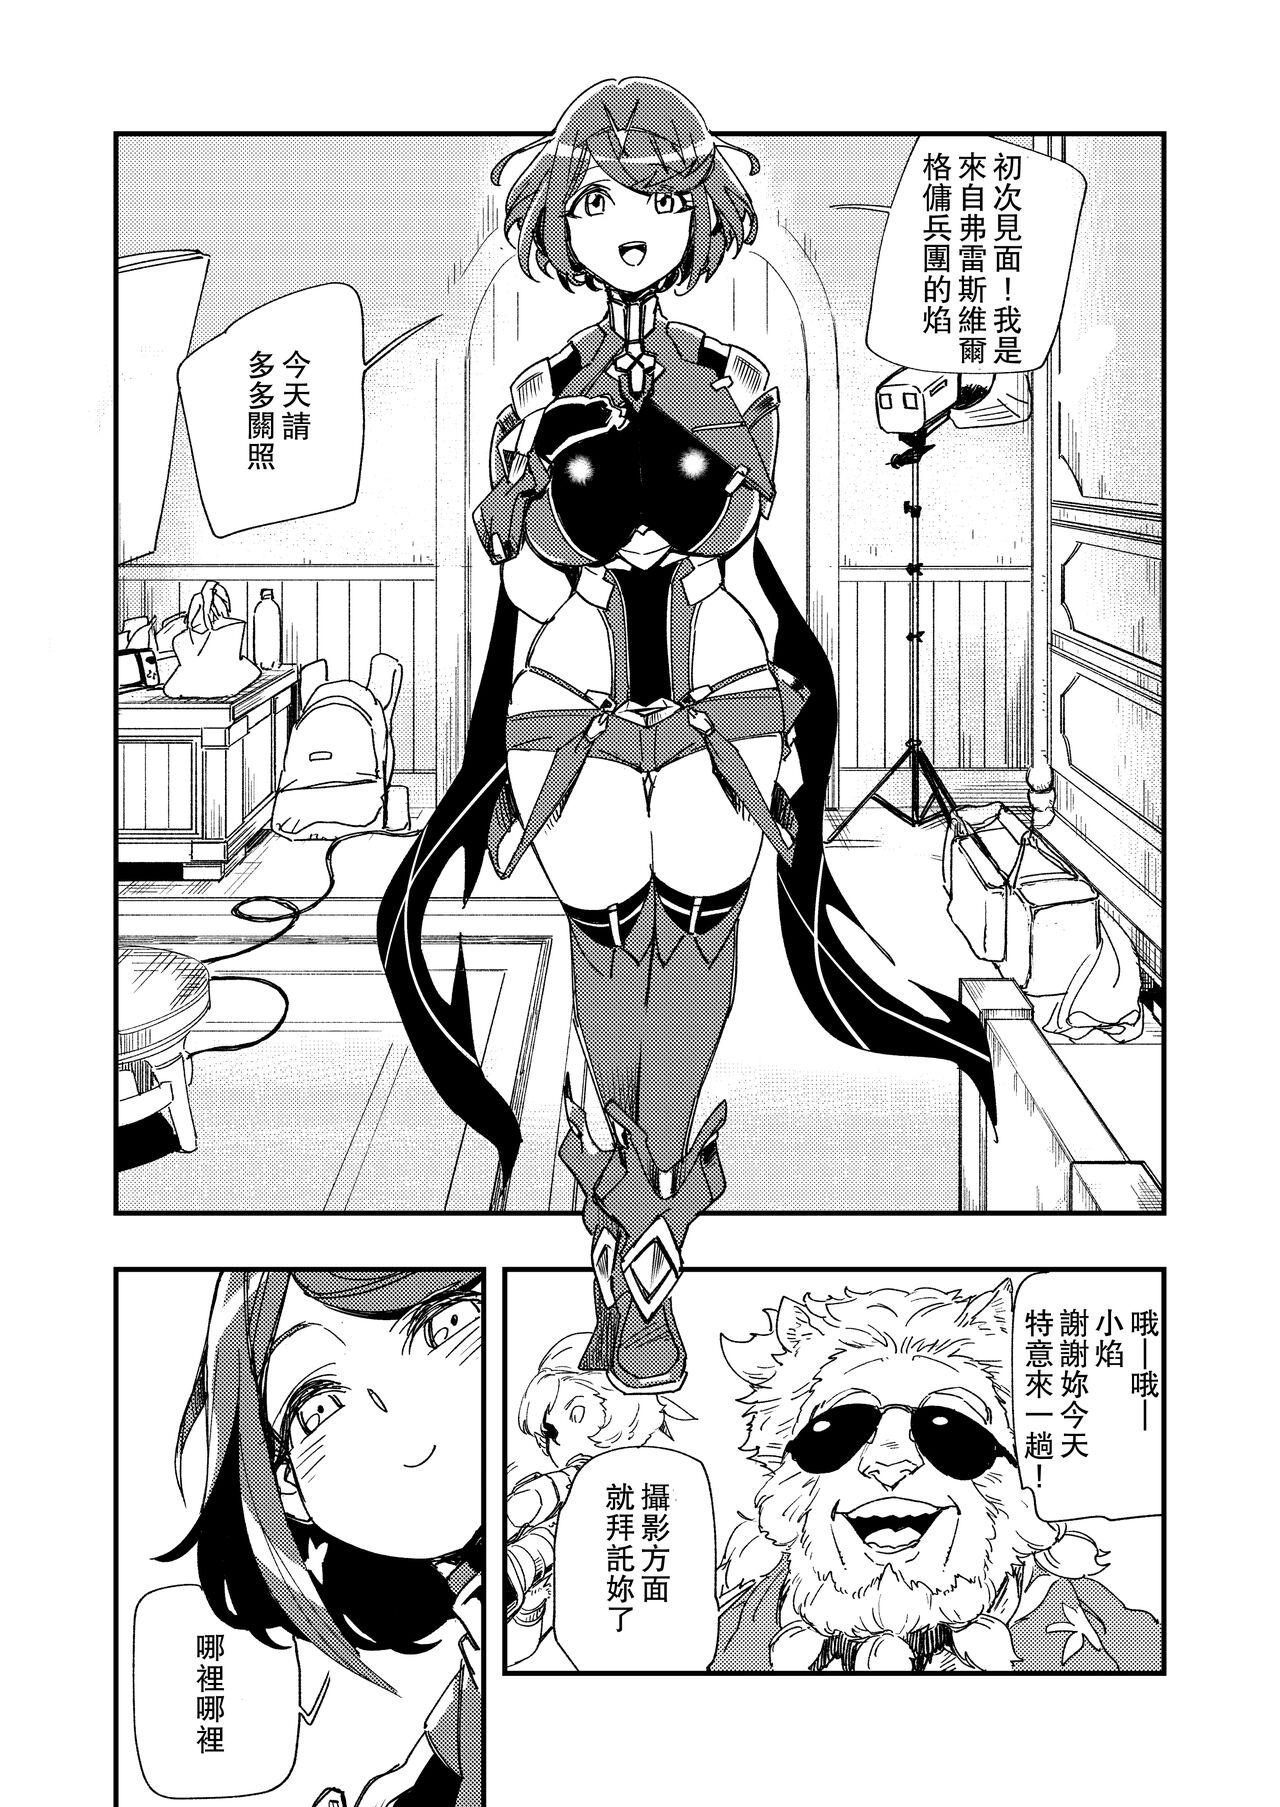 Mexicana NEAREST - Xenoblade chronicles 2 Ass - Page 3